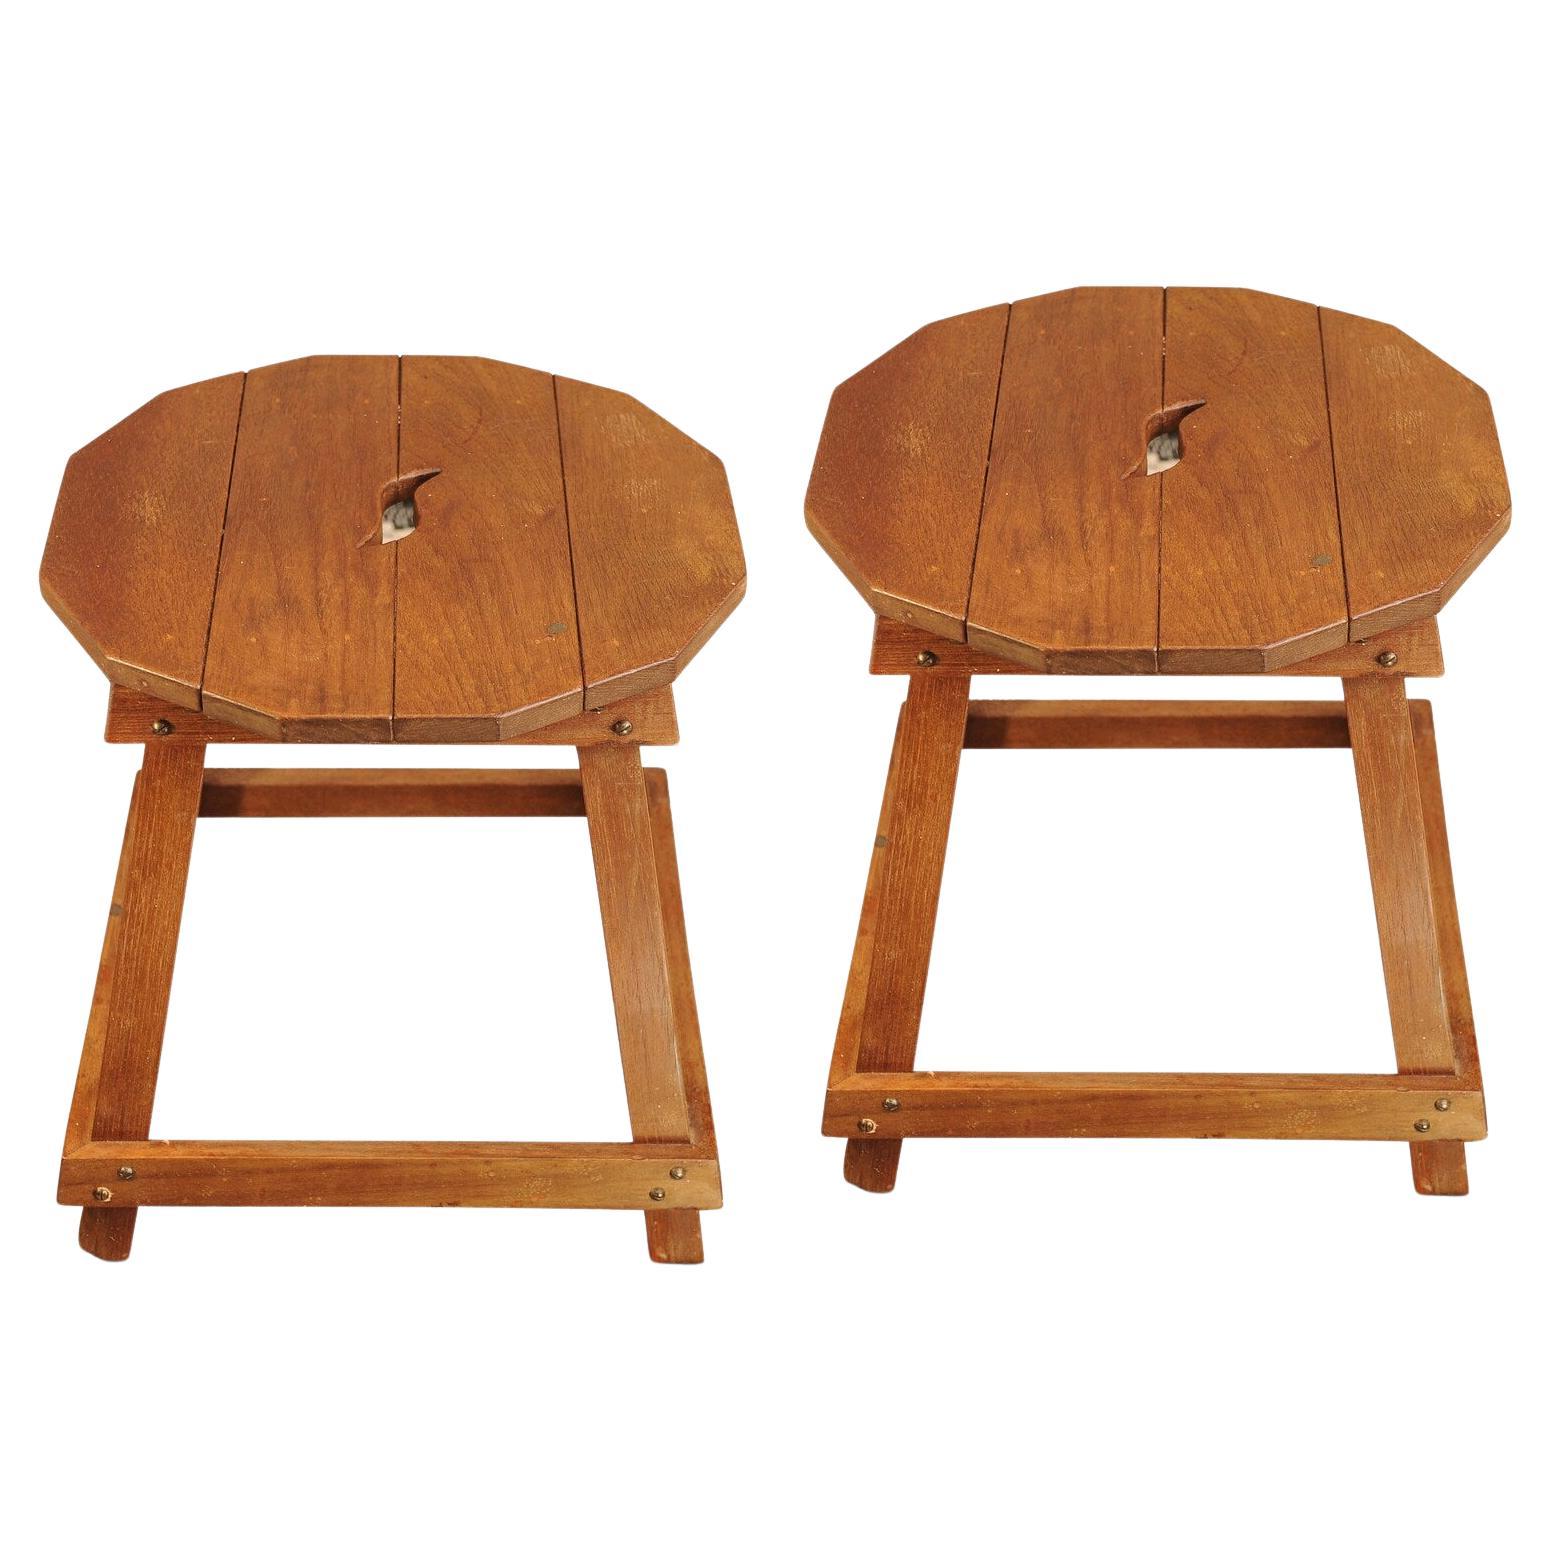 Stunning Pair Of Liberty of London Matching Arts And Crafts Primitive Oak Stools With Carry Handle To Seat. Early 1900's

